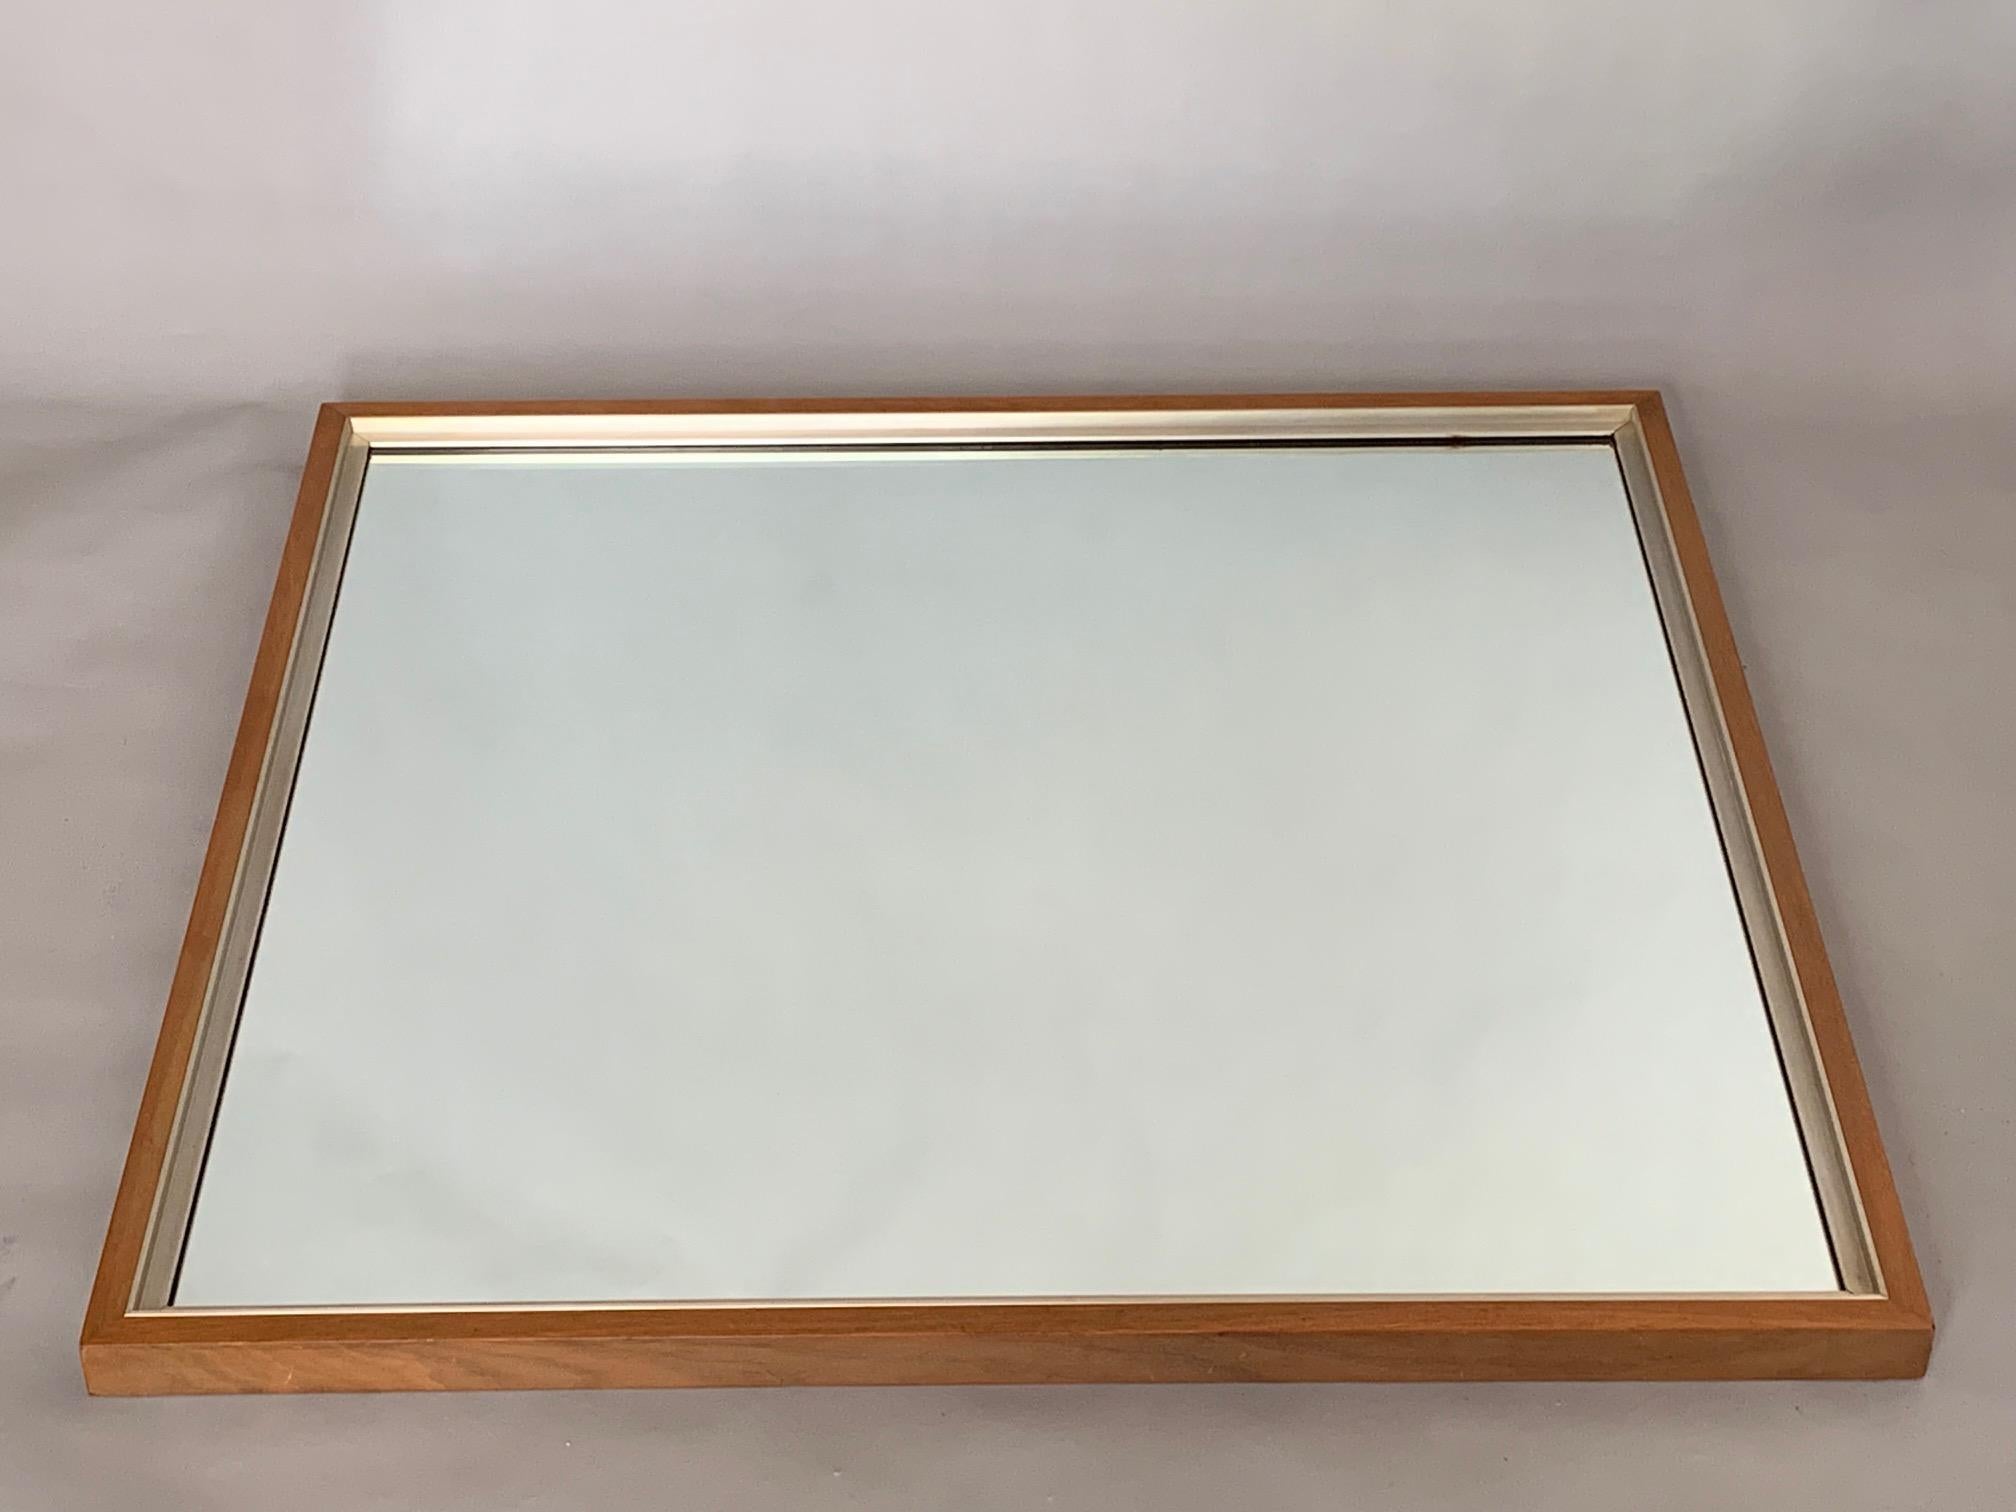 An unusual Paul McCobb mirror in walnut and aluminum from the Calvin collection. Measures approximately 34x36